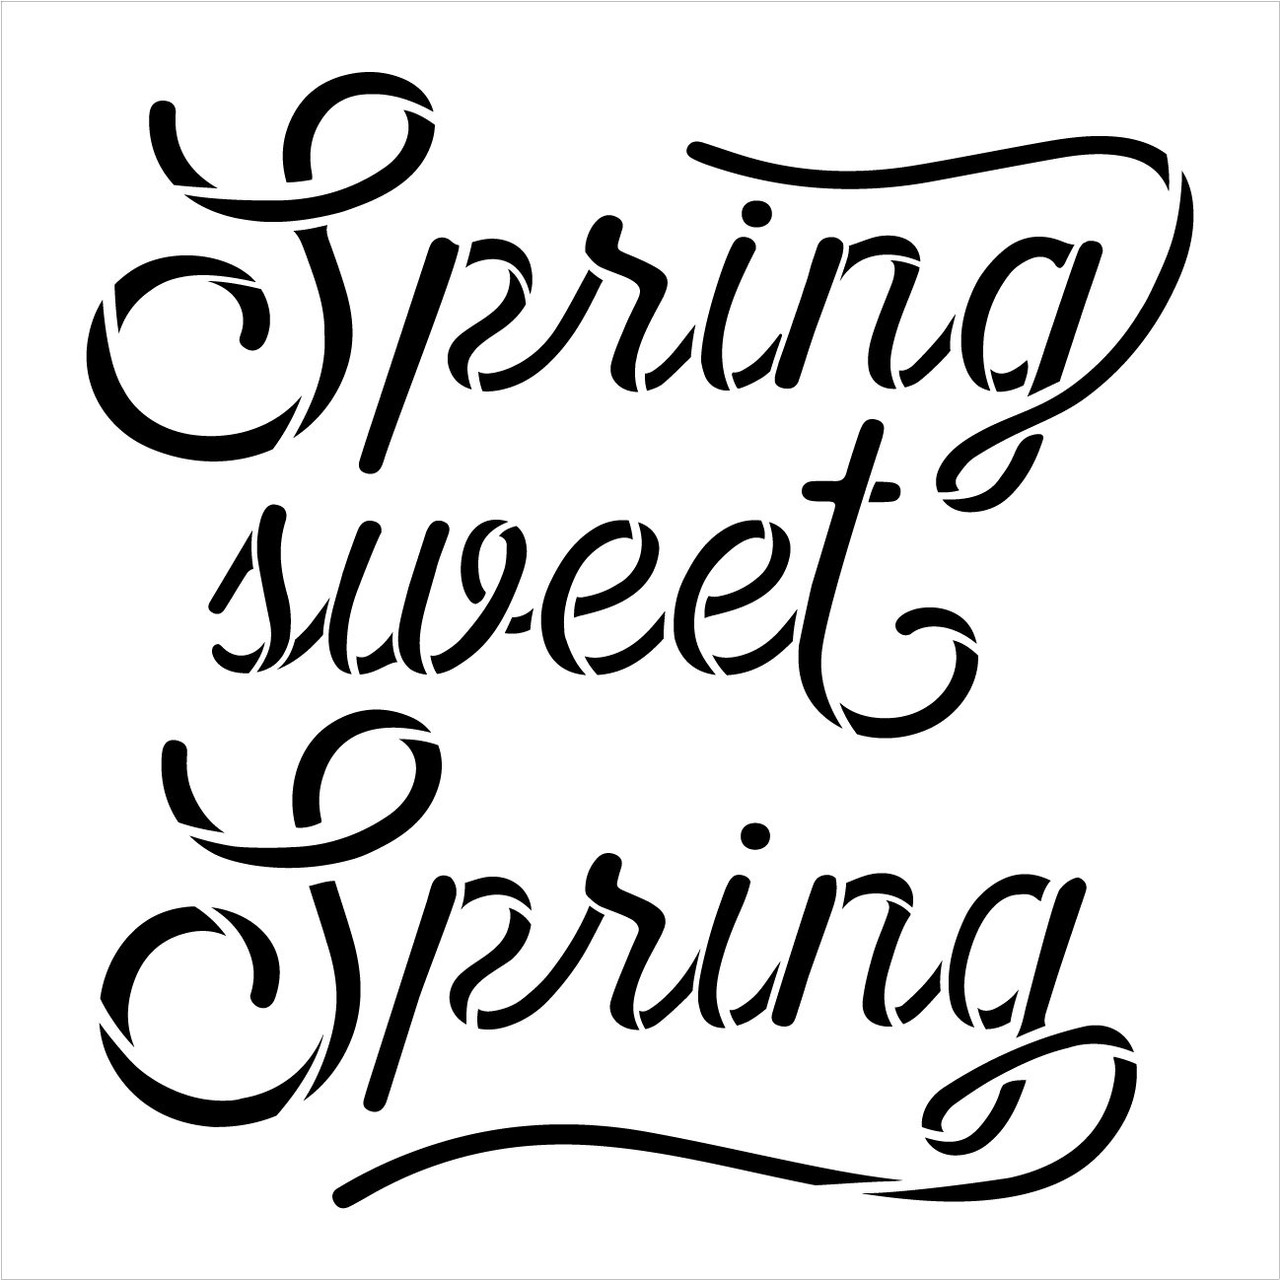 Spring Sweet Spring Stencil by StudioR12 | Craft DIY Spring Home Decor | Paint Seasonal Wood Sign | Reusable Mylar Template | Select Size